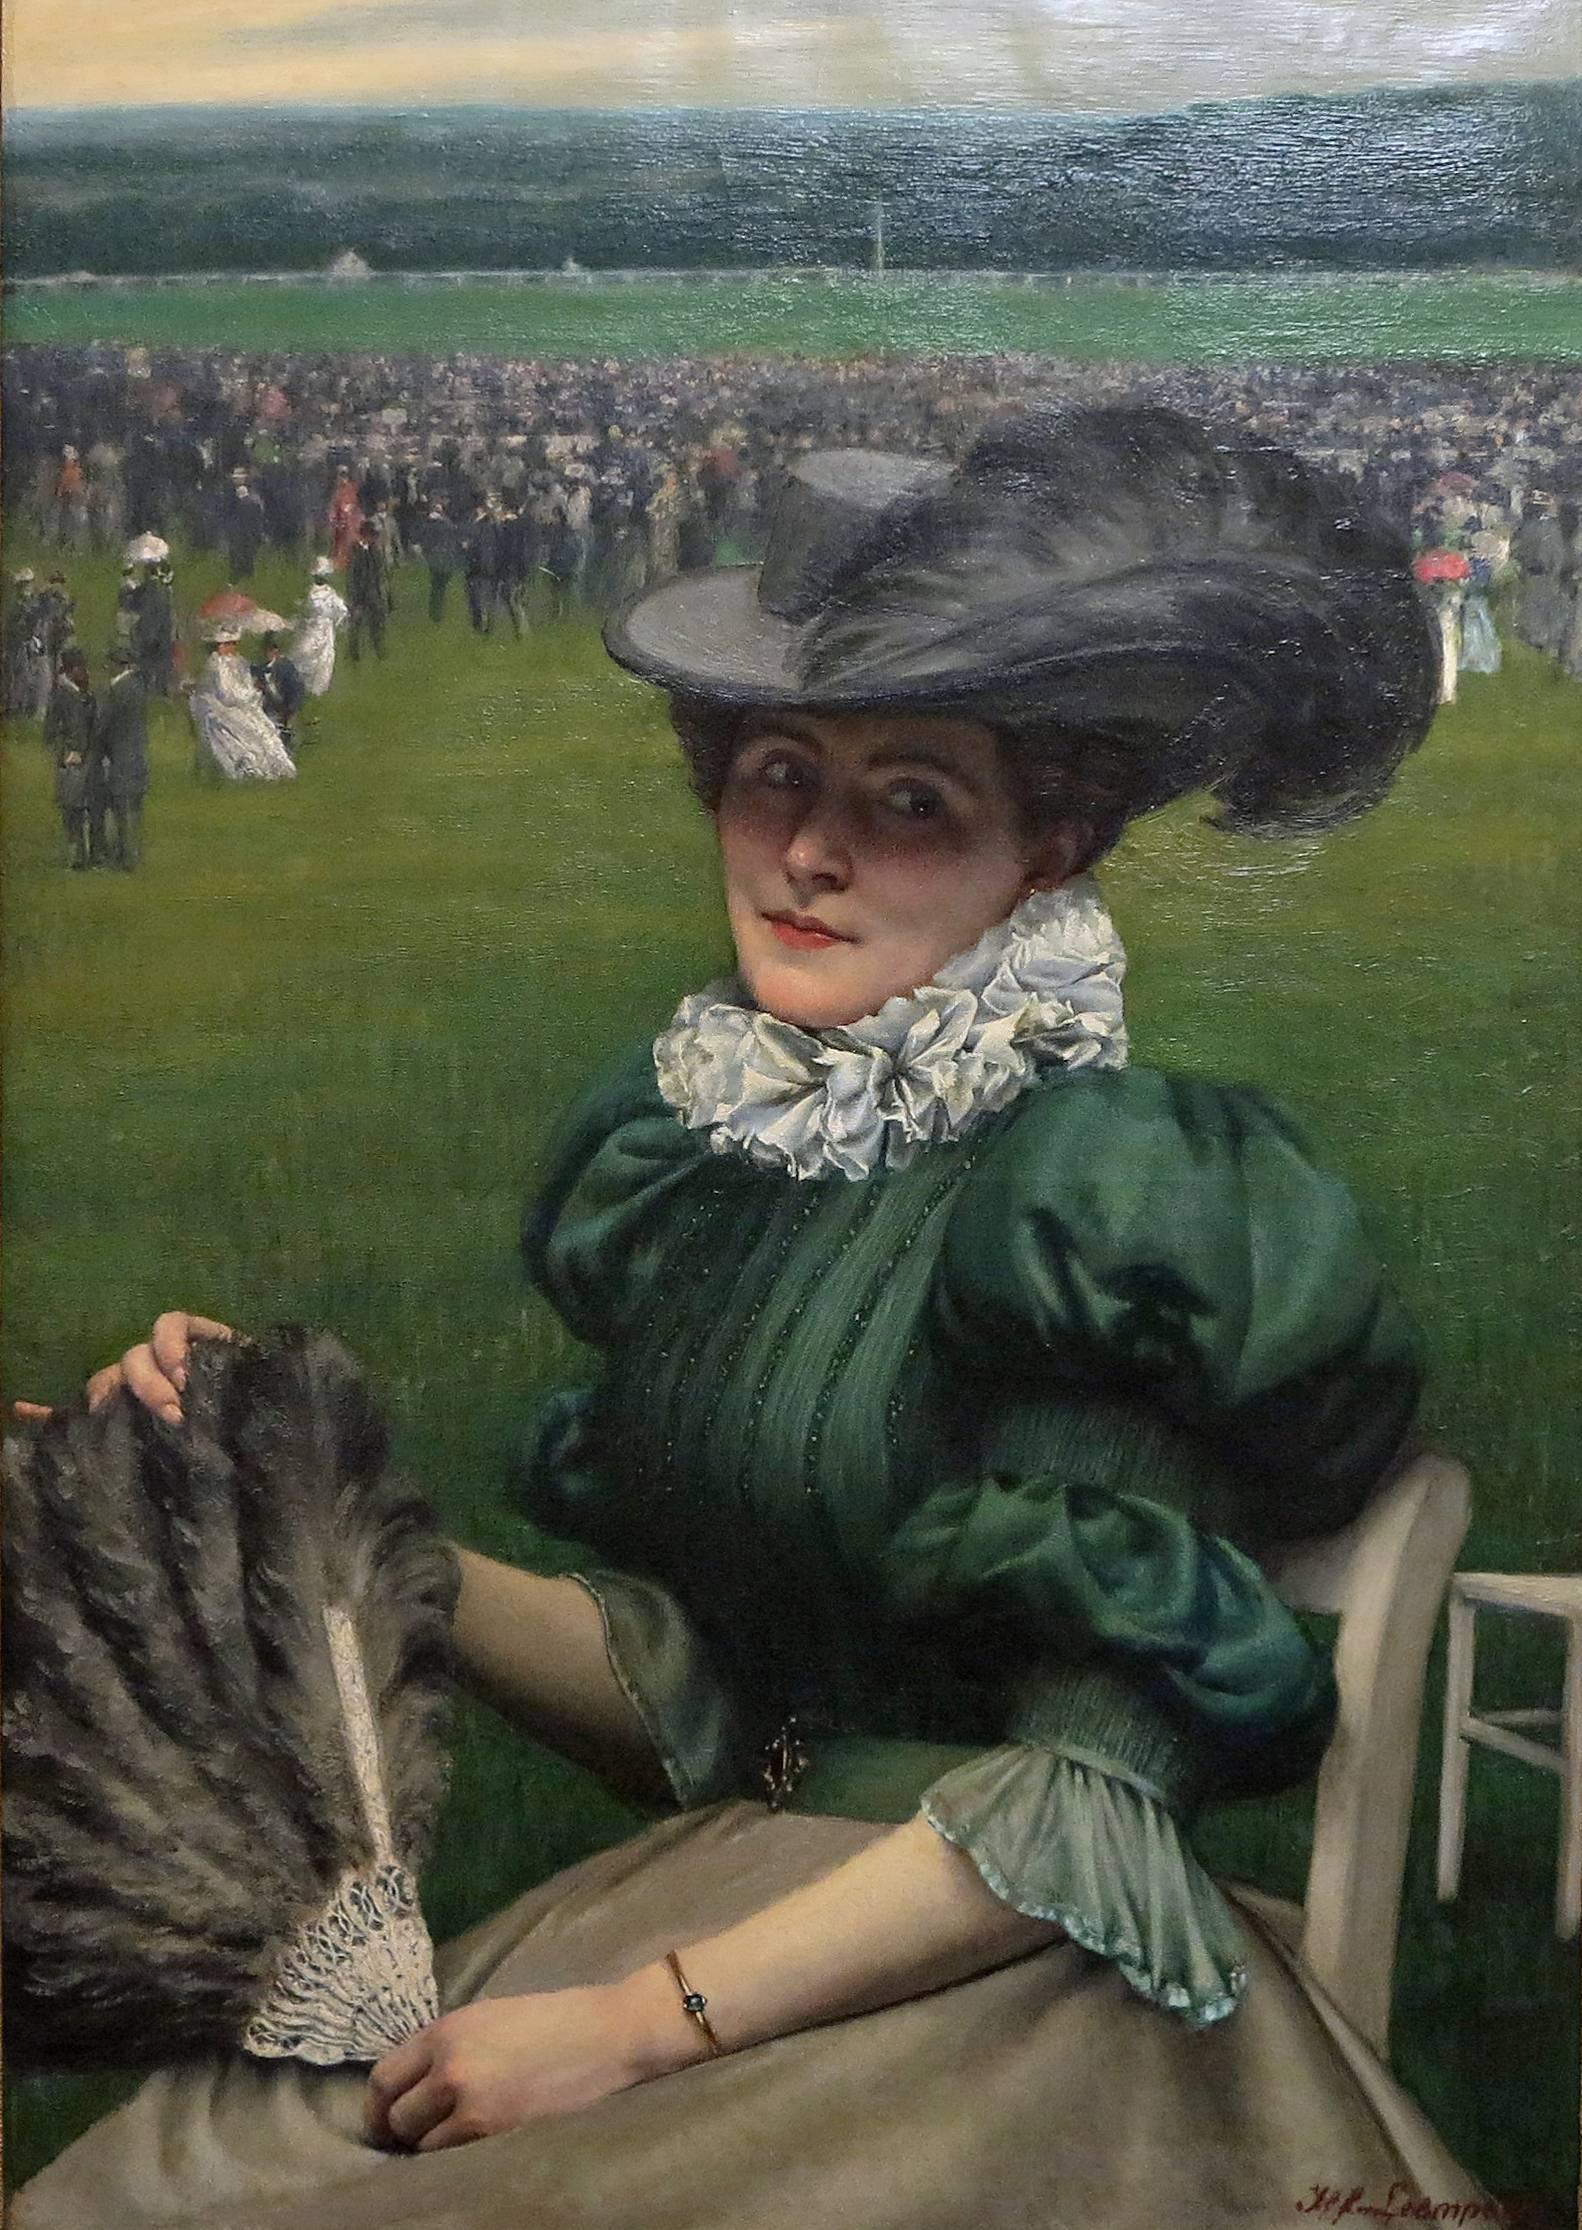 Jef Leempoels.
Belgium, 1867–1935 .
At the races.

Oil on canvas.
Signed lower right.
38 by 26 in. with frame 44 by 32 in.

Jef Leempoels was born in Brussels in 1867. He was a student of Francois Portaels
and Jan Stallaert and studied at